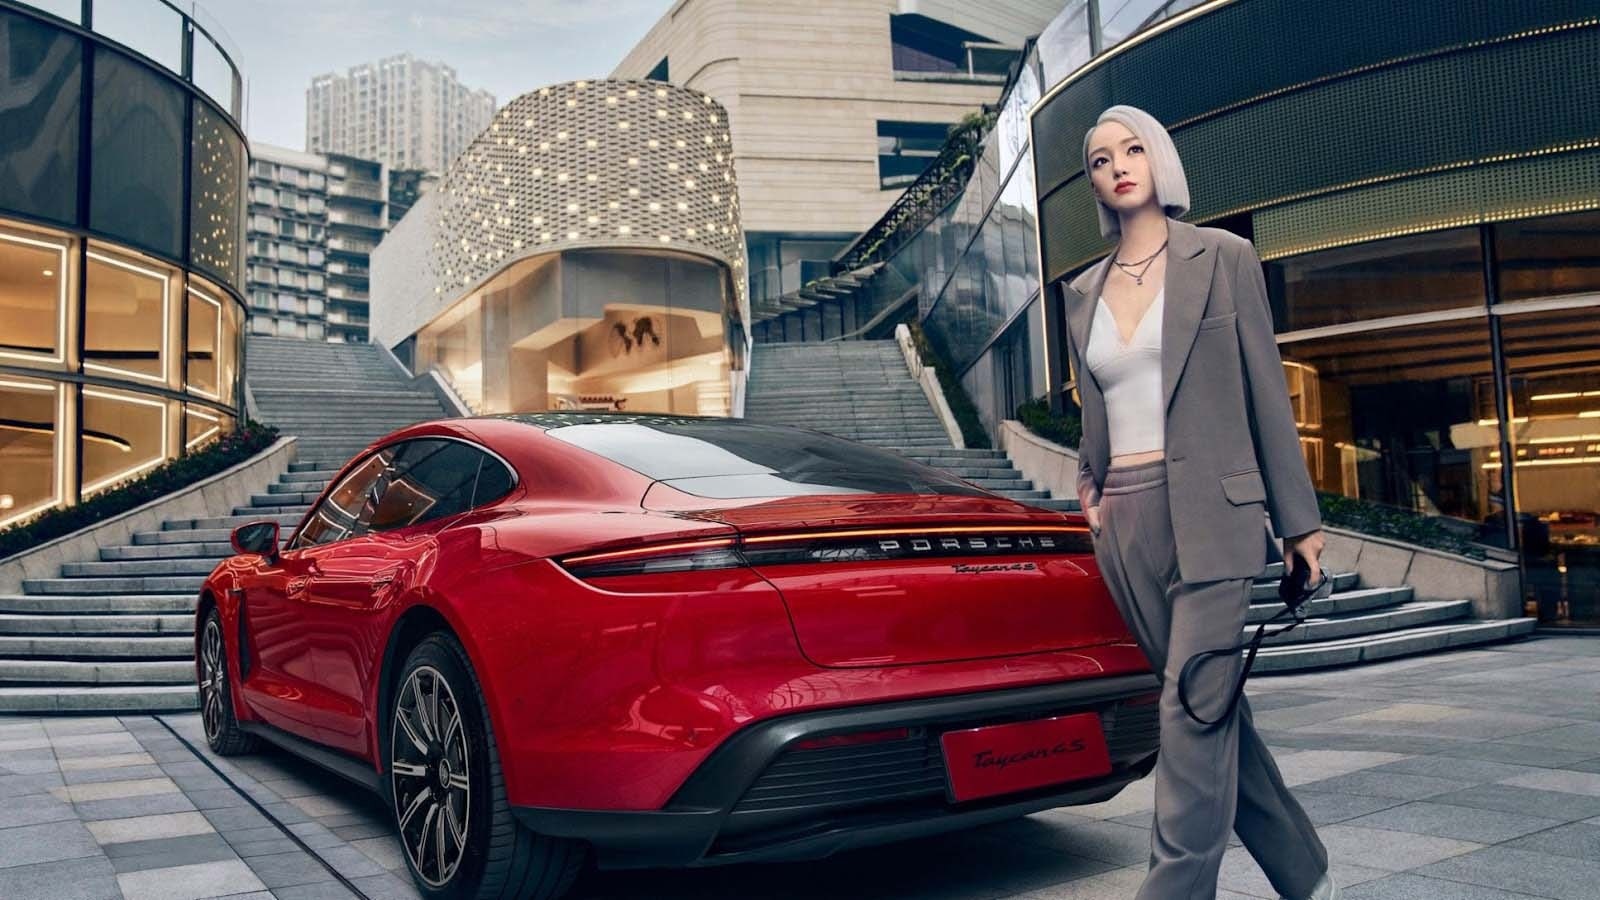 Who are China’s top virtual humans and why are luxury brands like Bulgari, Porsche, Estée Lauder and Tissot collaborating with them? Image: Weibo